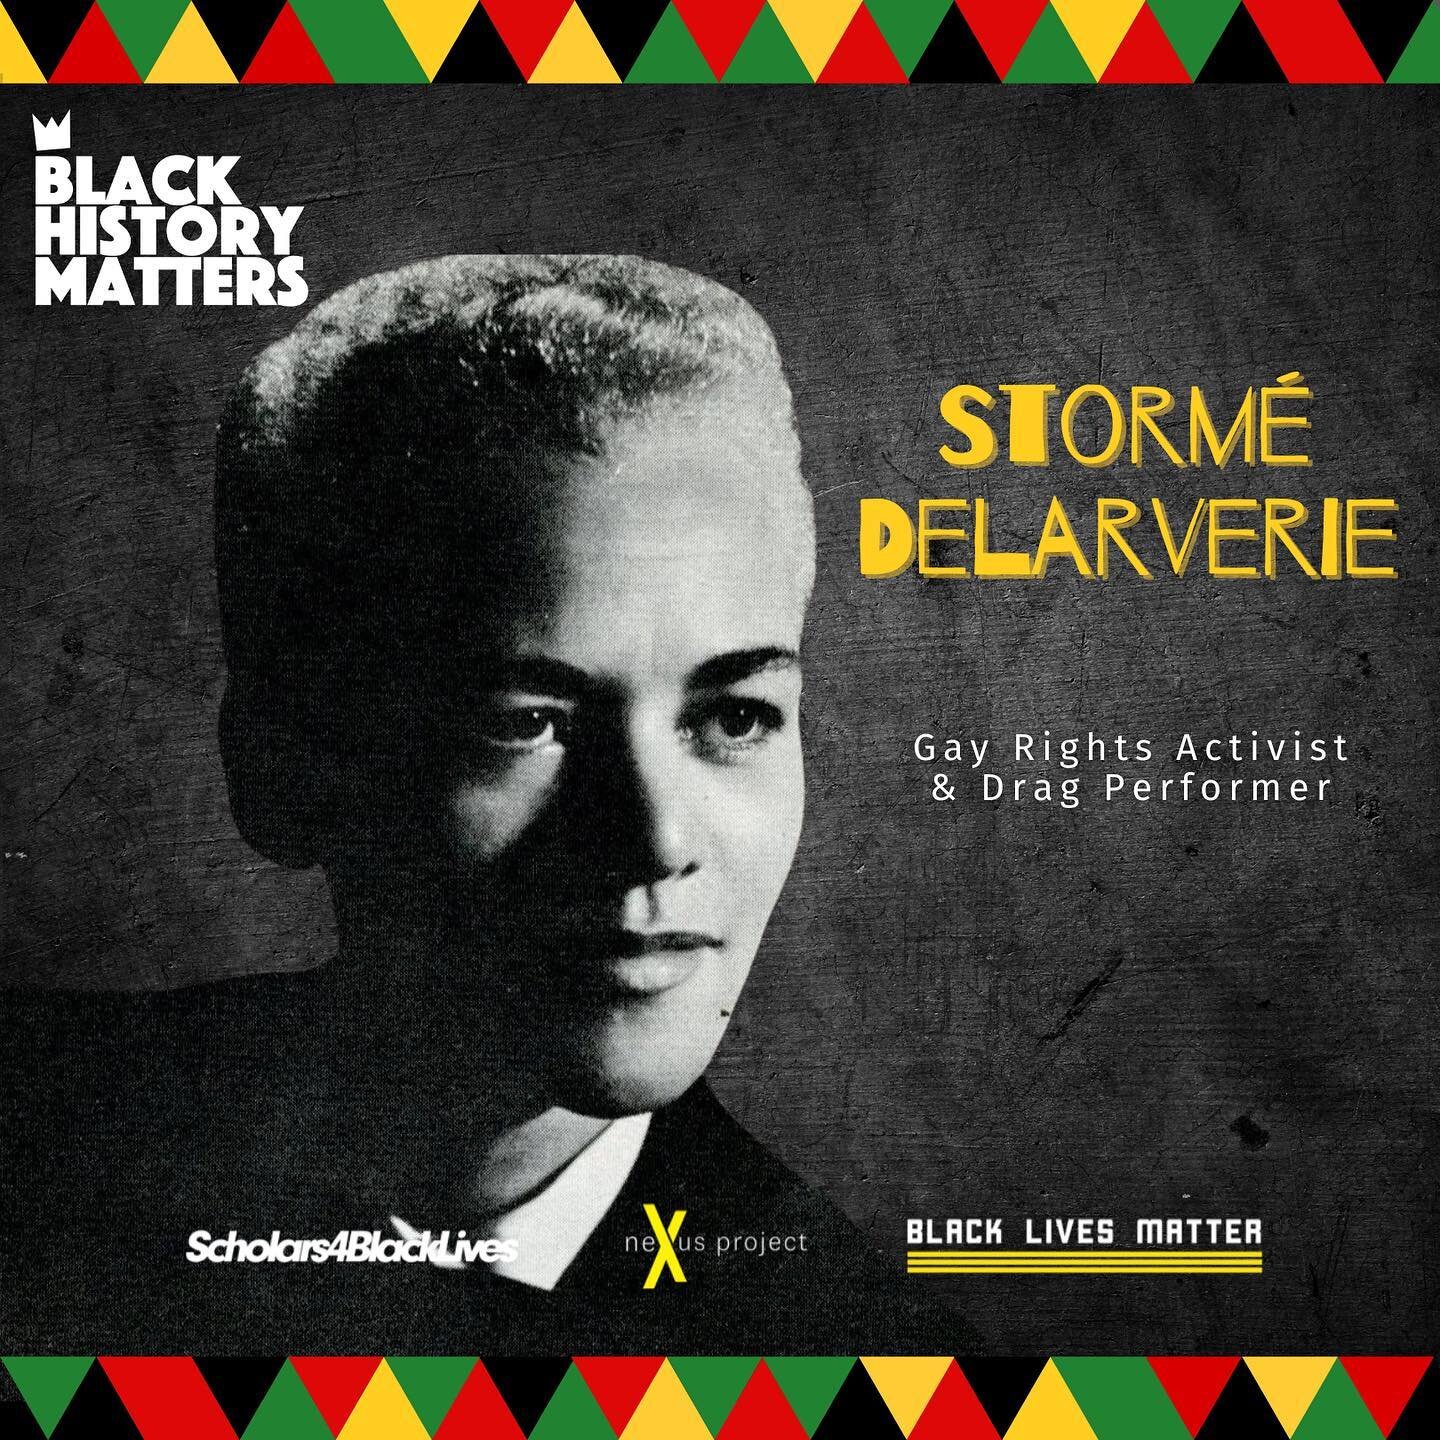 Storm&eacute; DeLarverie was born in New Orleans in 1920, to a Black mother and white father. In the 50s &amp; 60s, Storm&eacute; performed with New York&rsquo;s only racially integrated drag troupe, The Jewel Box Revue, where she was also, the only 